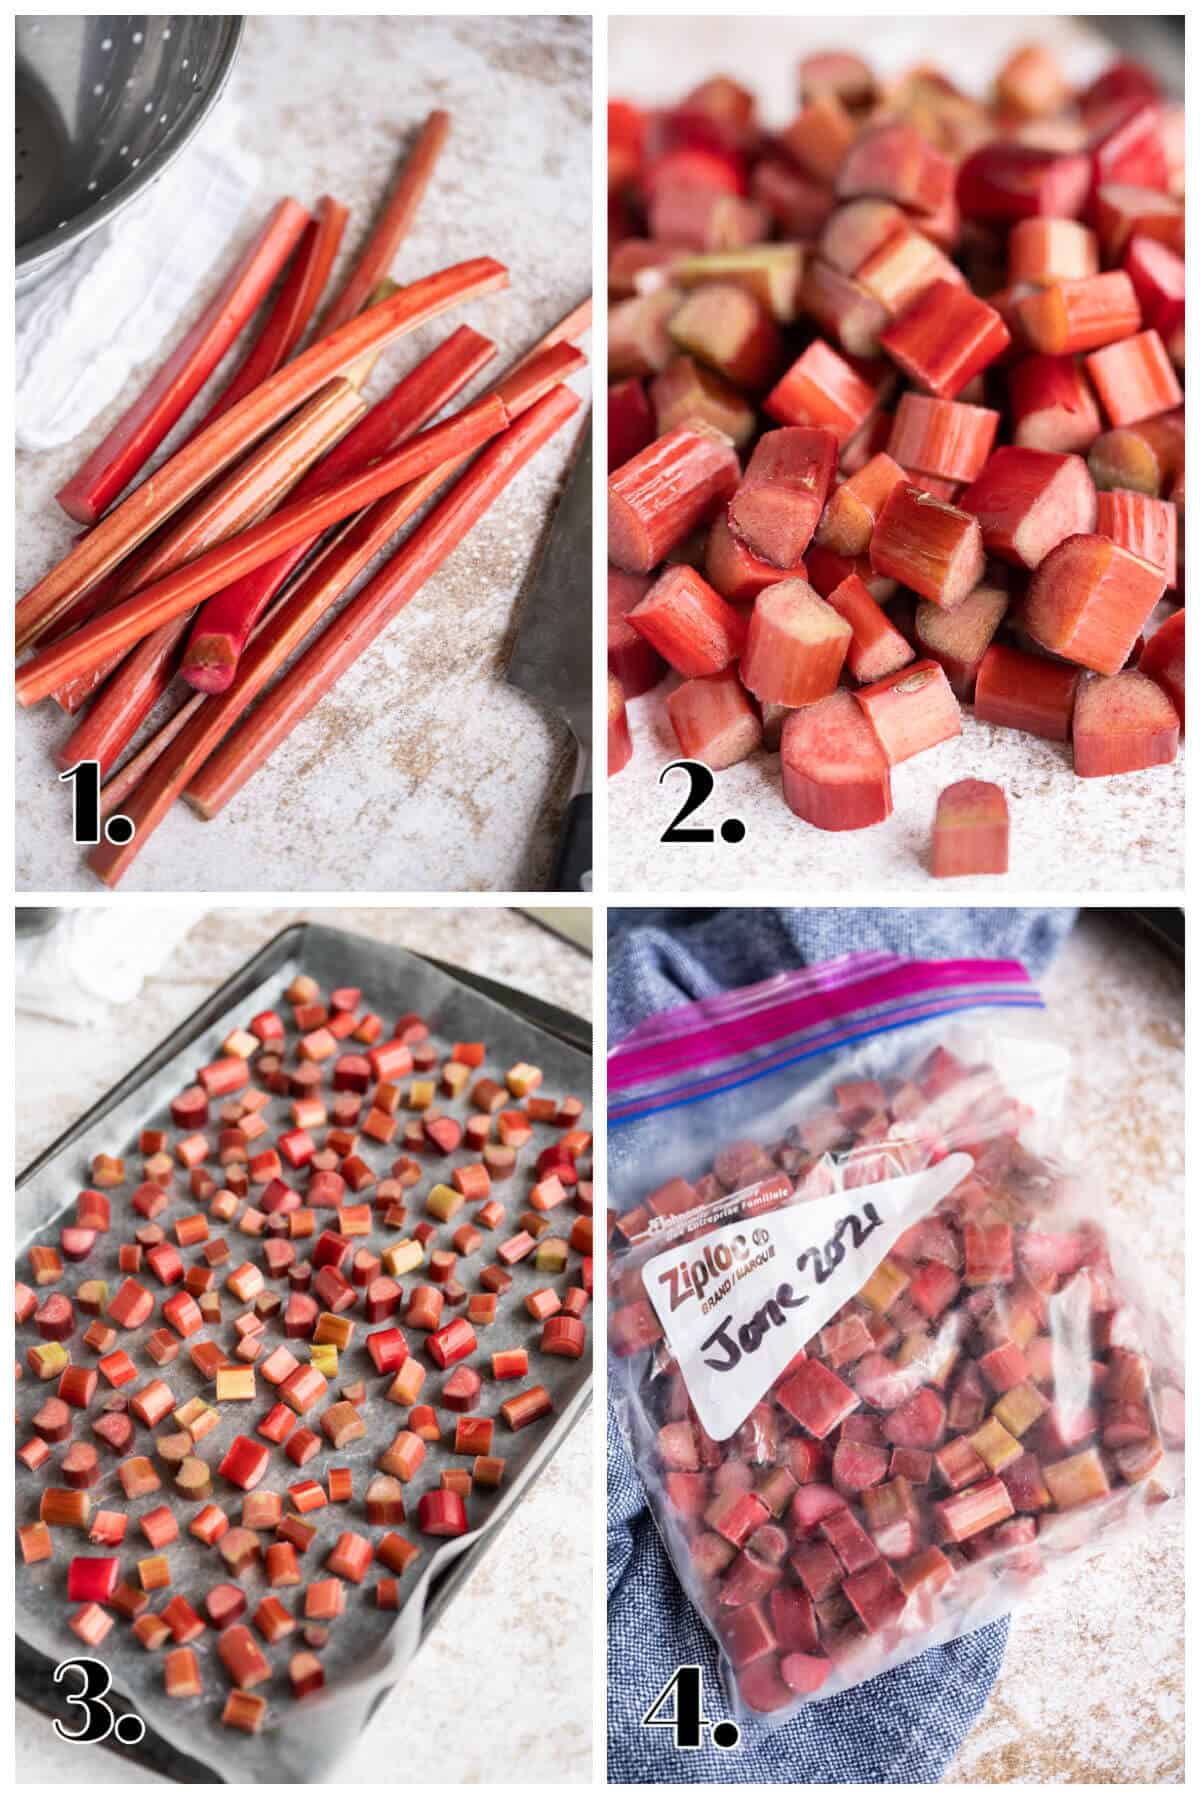 4 image collage showing the steps to freezing raw rhubarb. 1-wash, 2-cut, 3-place on pan, 4-bag.